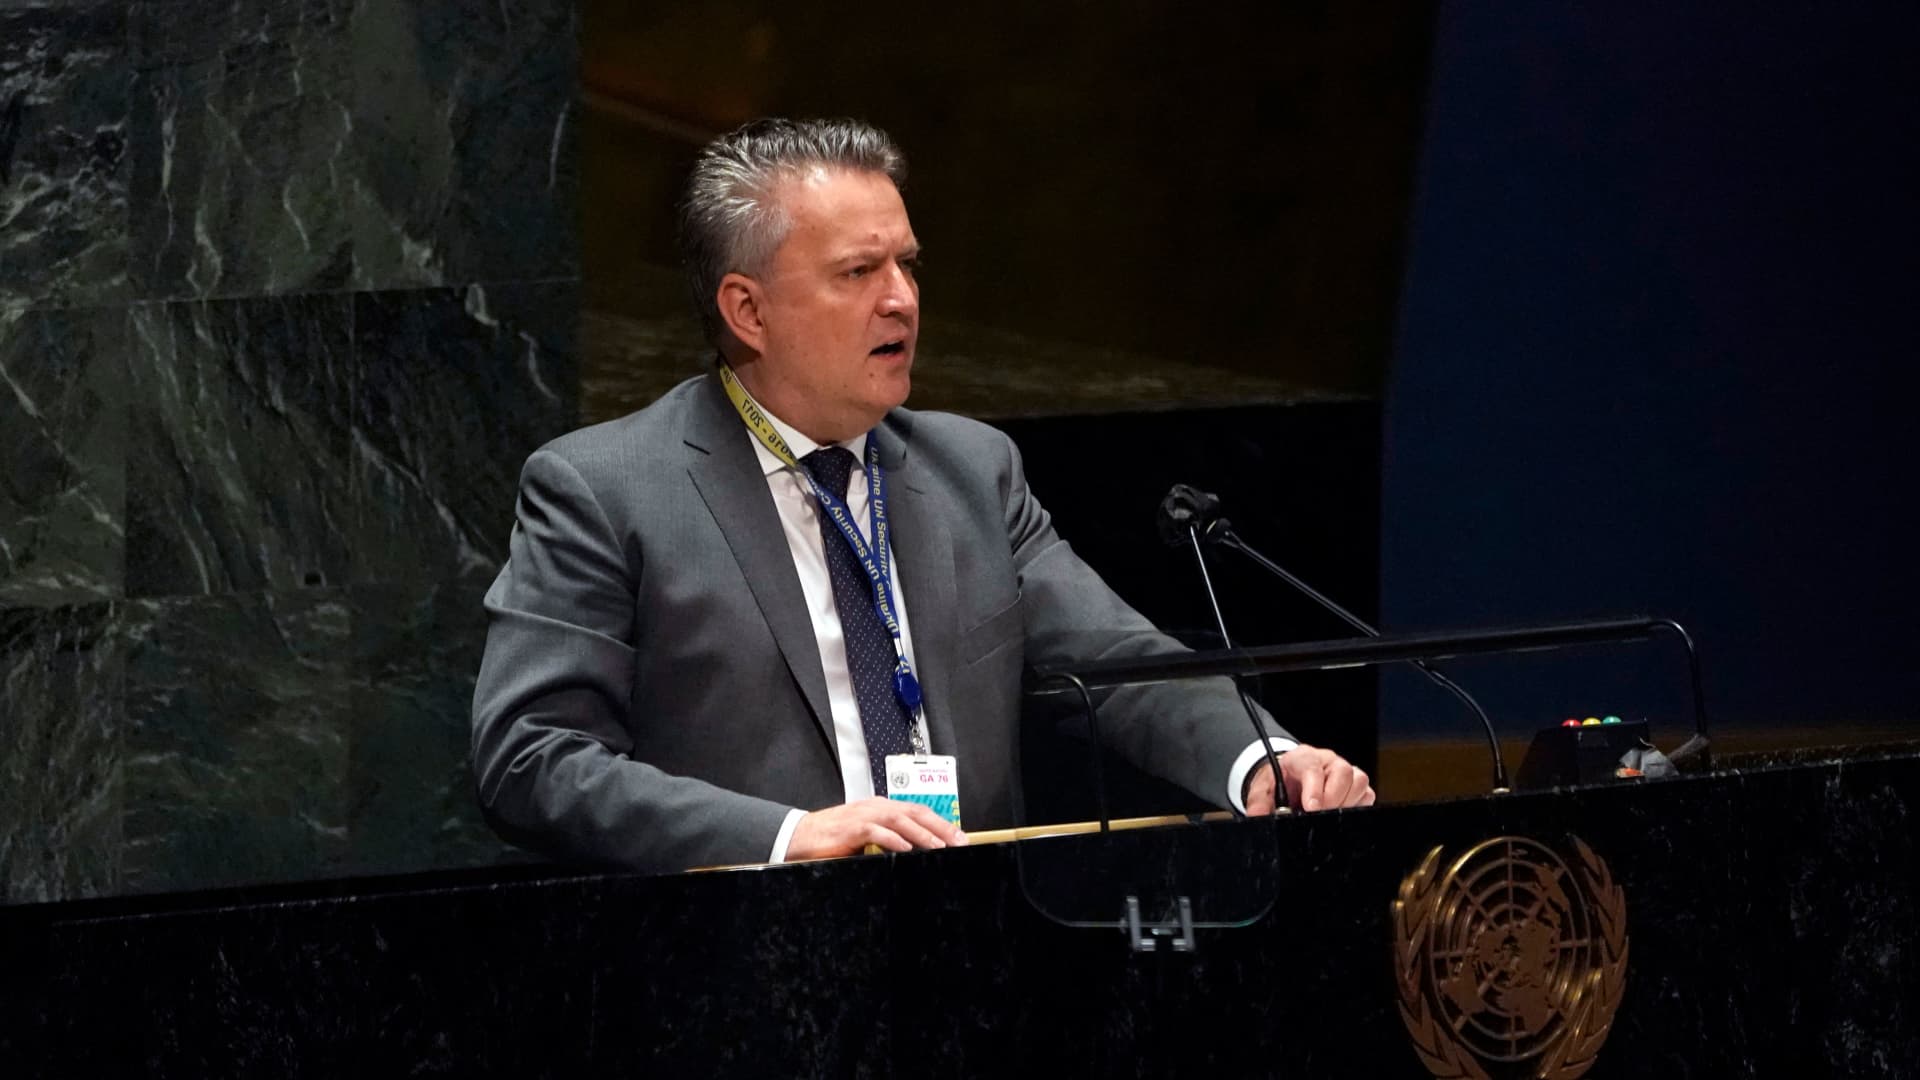 Ukraine's UN Ambassador Sergiy Kyslytsya speaks during a General Assembly Emergency Special Session on Ukraine at the United Nations in New York on March 23, 2022.